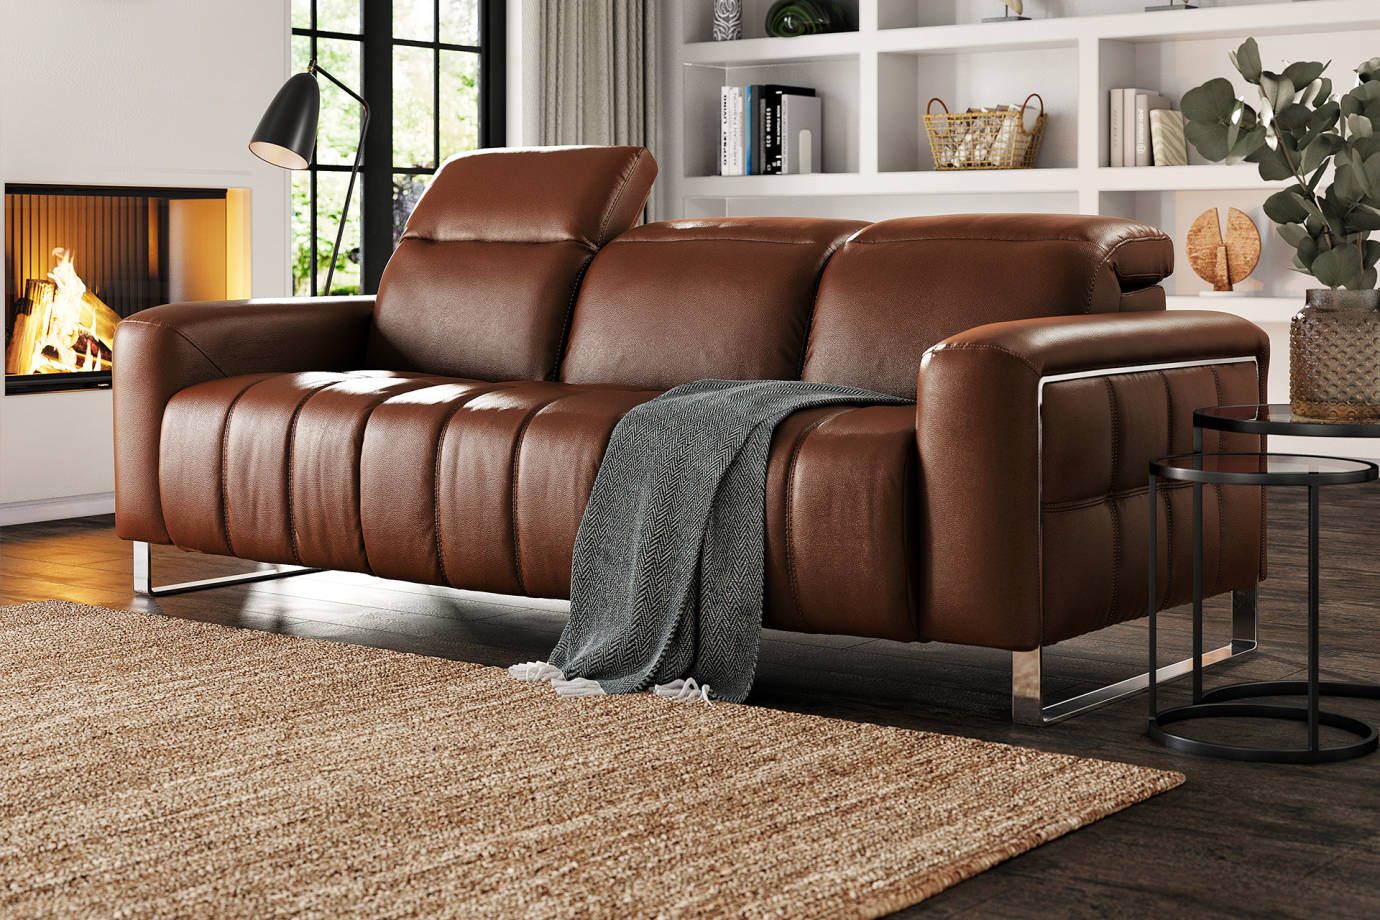 Leather Sofas | Sofology Regarding Faux Leather Sofas In Chocolate Brown (View 15 of 15)